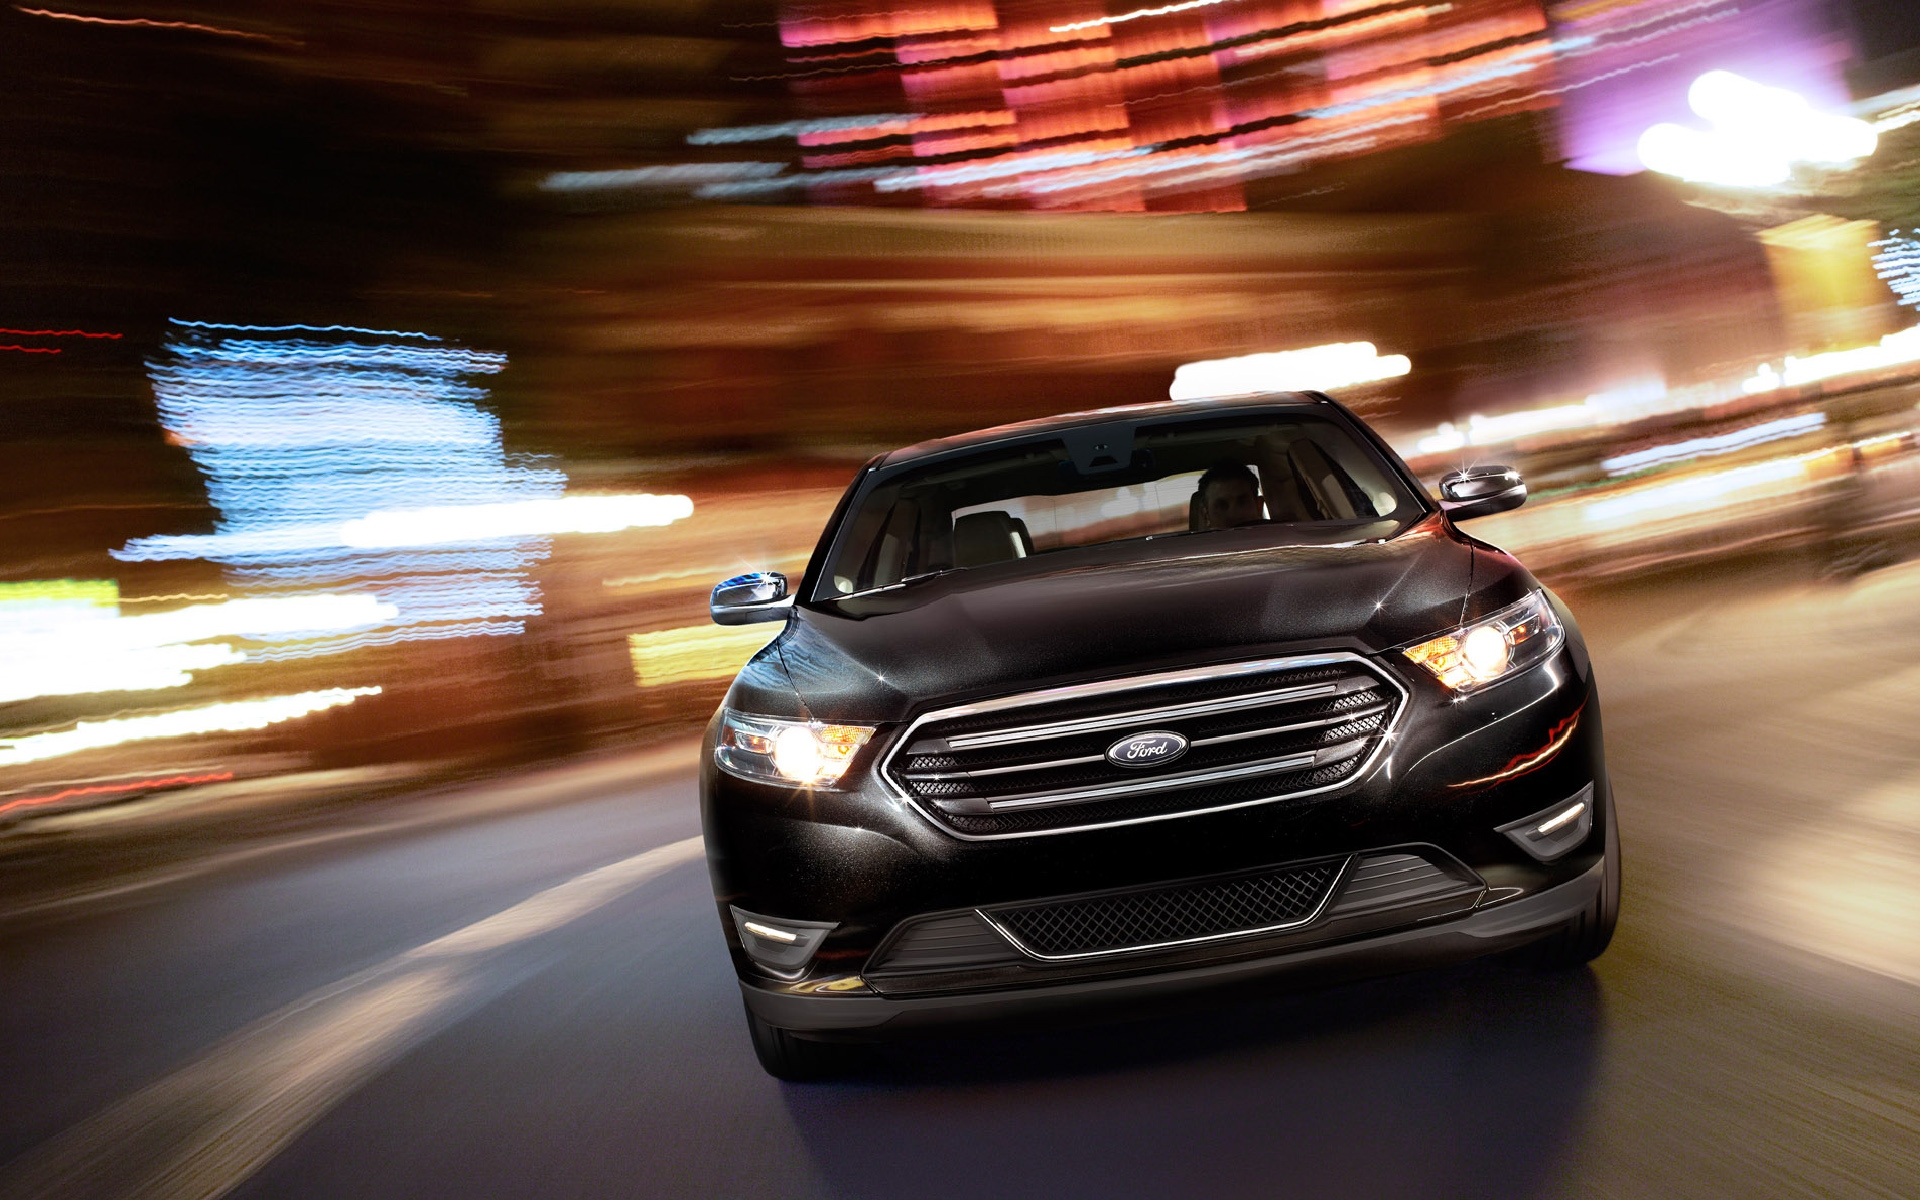 Ford Taurus Hd Wallpaper Background Image 1920x1200